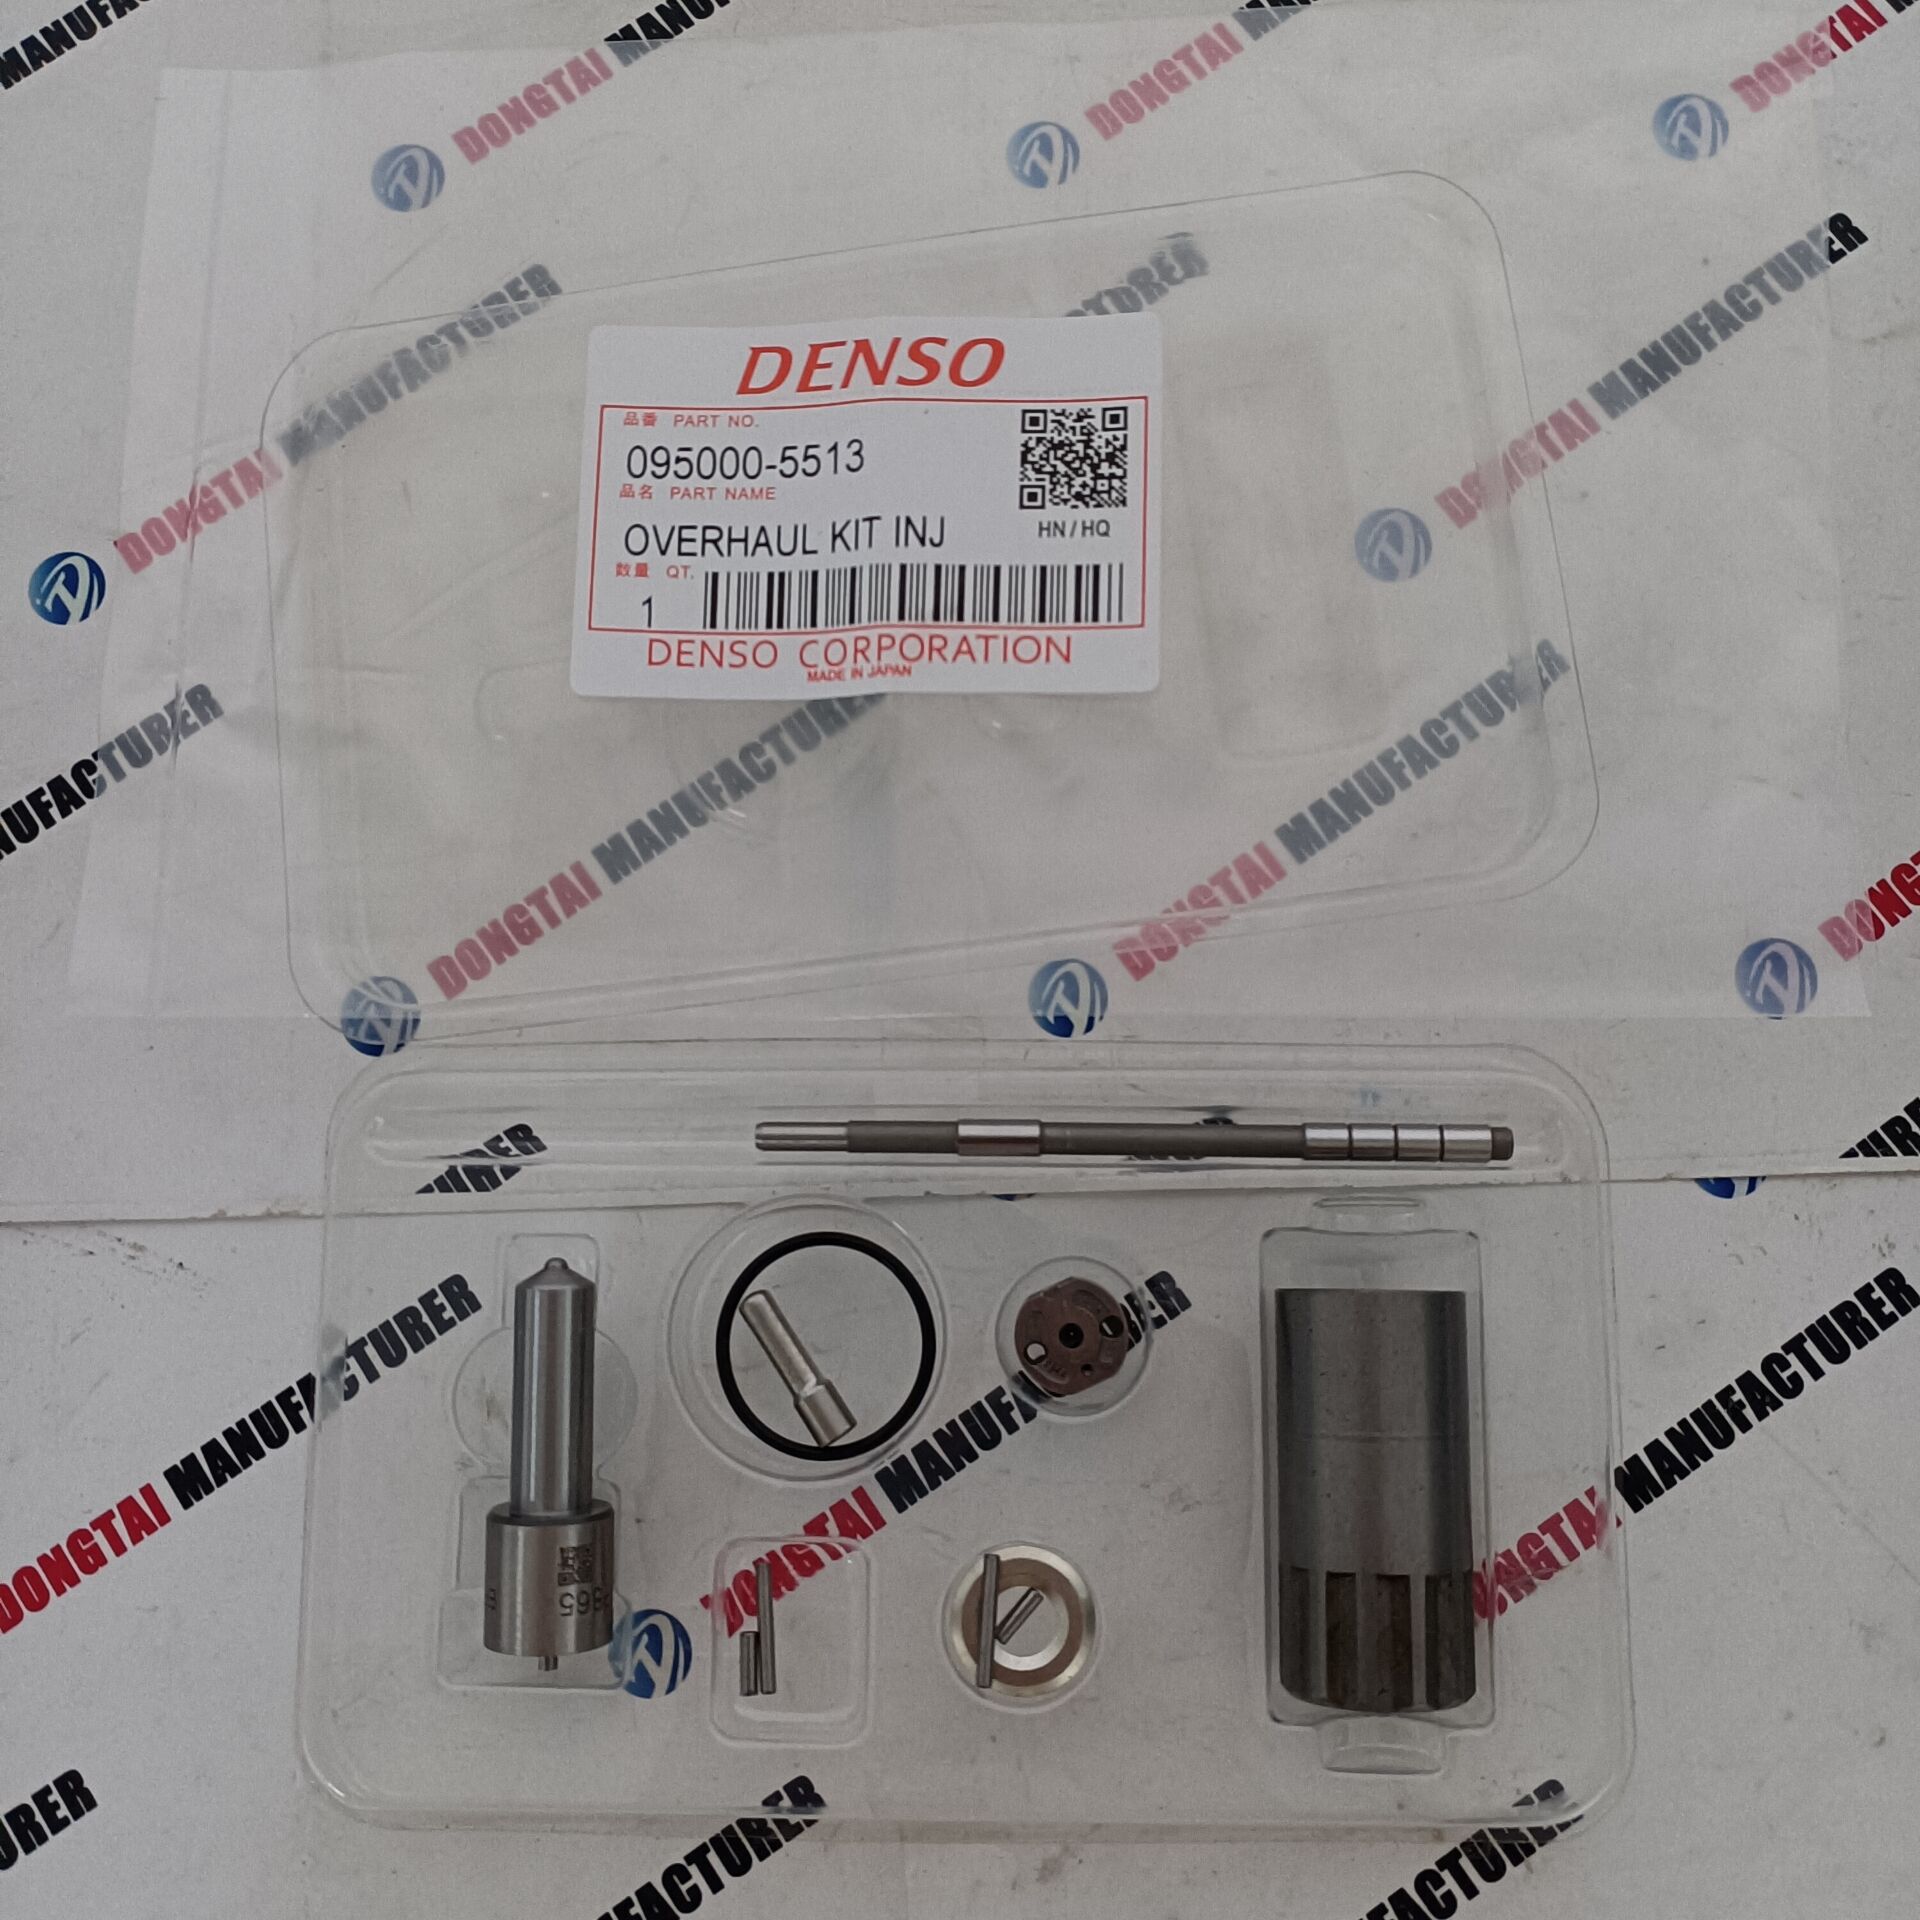 DENSO Common Rail Injector Repair kits for 095000-5513